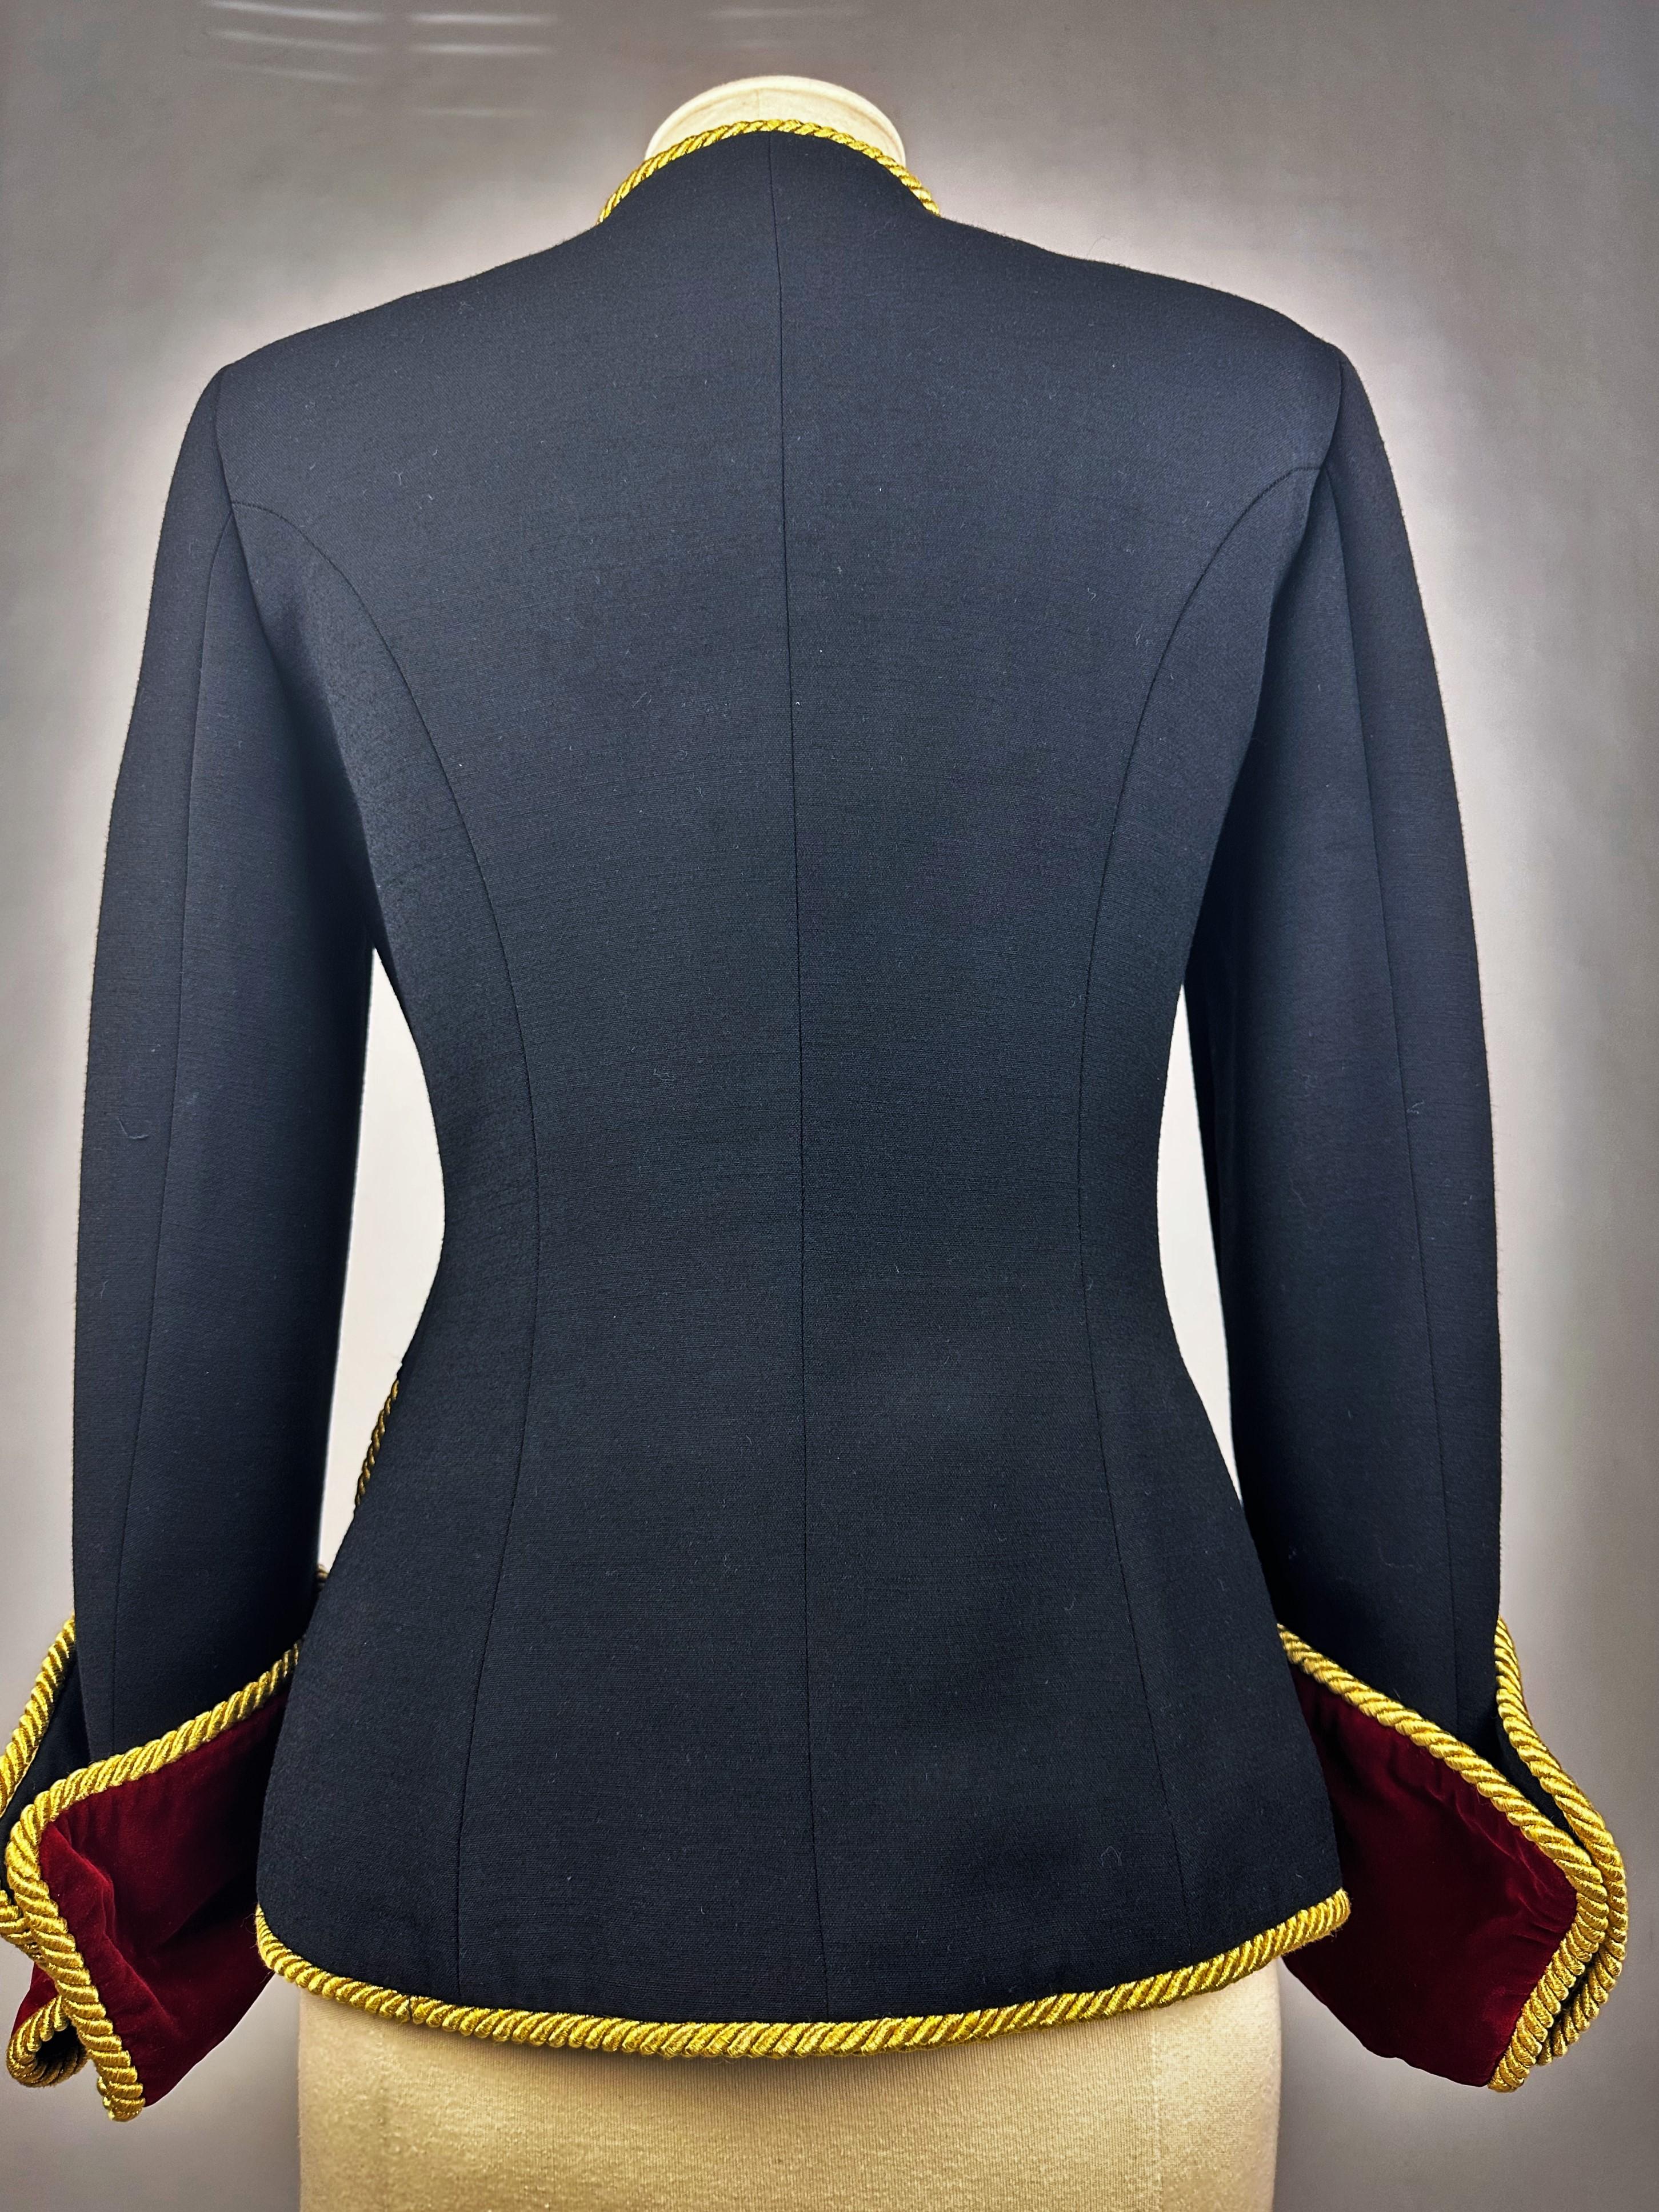 An Evening Jacket by Franco Moschino Couture Circa 1990 For Sale 7